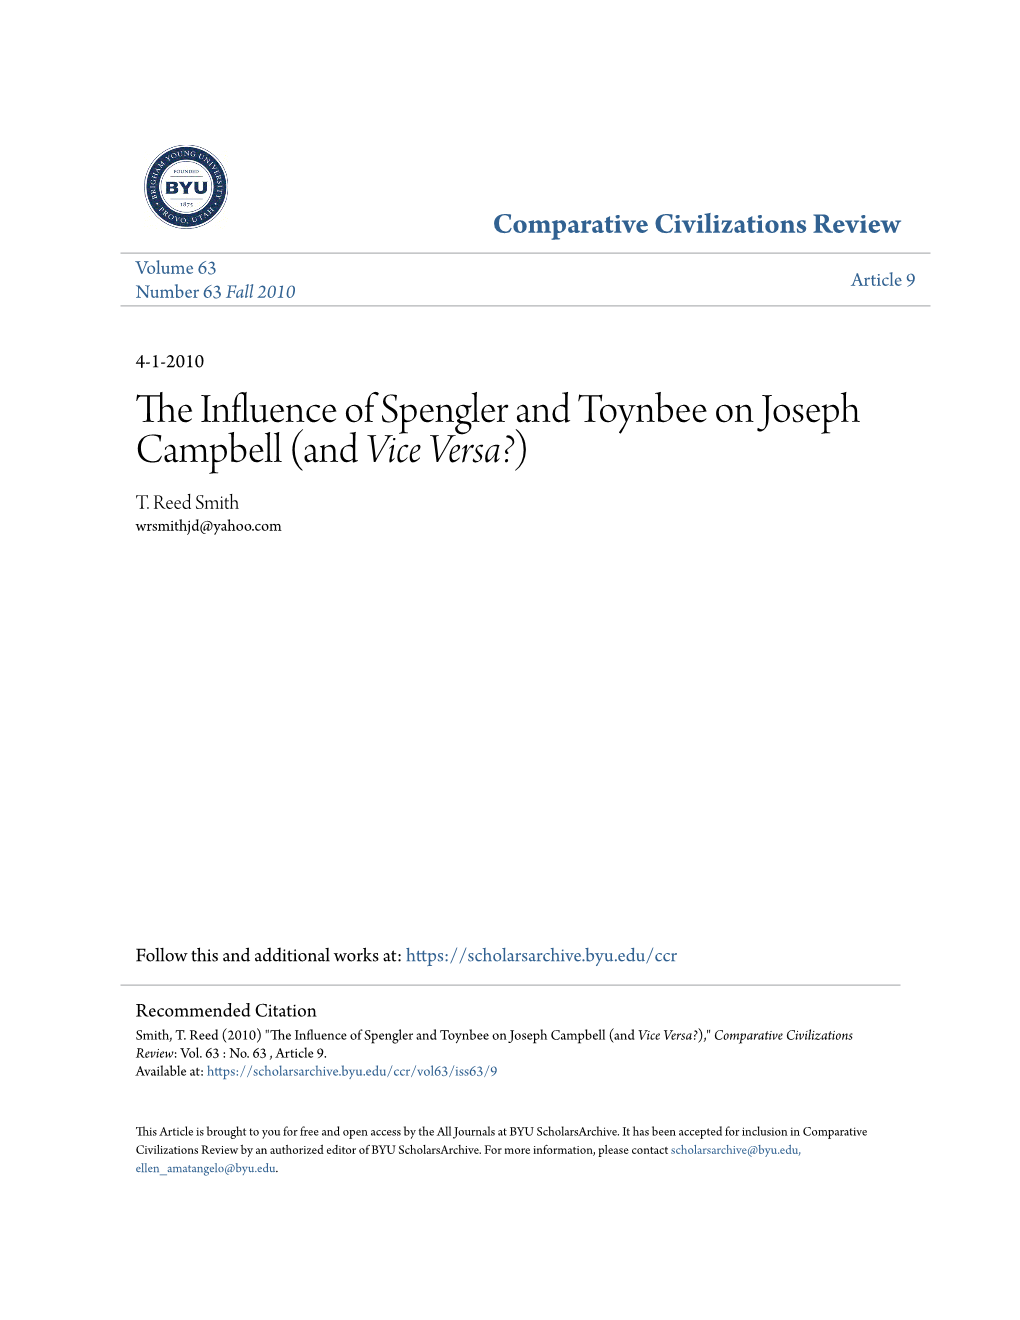 The Influence of Spengler and Toynbee on Joseph Campbell